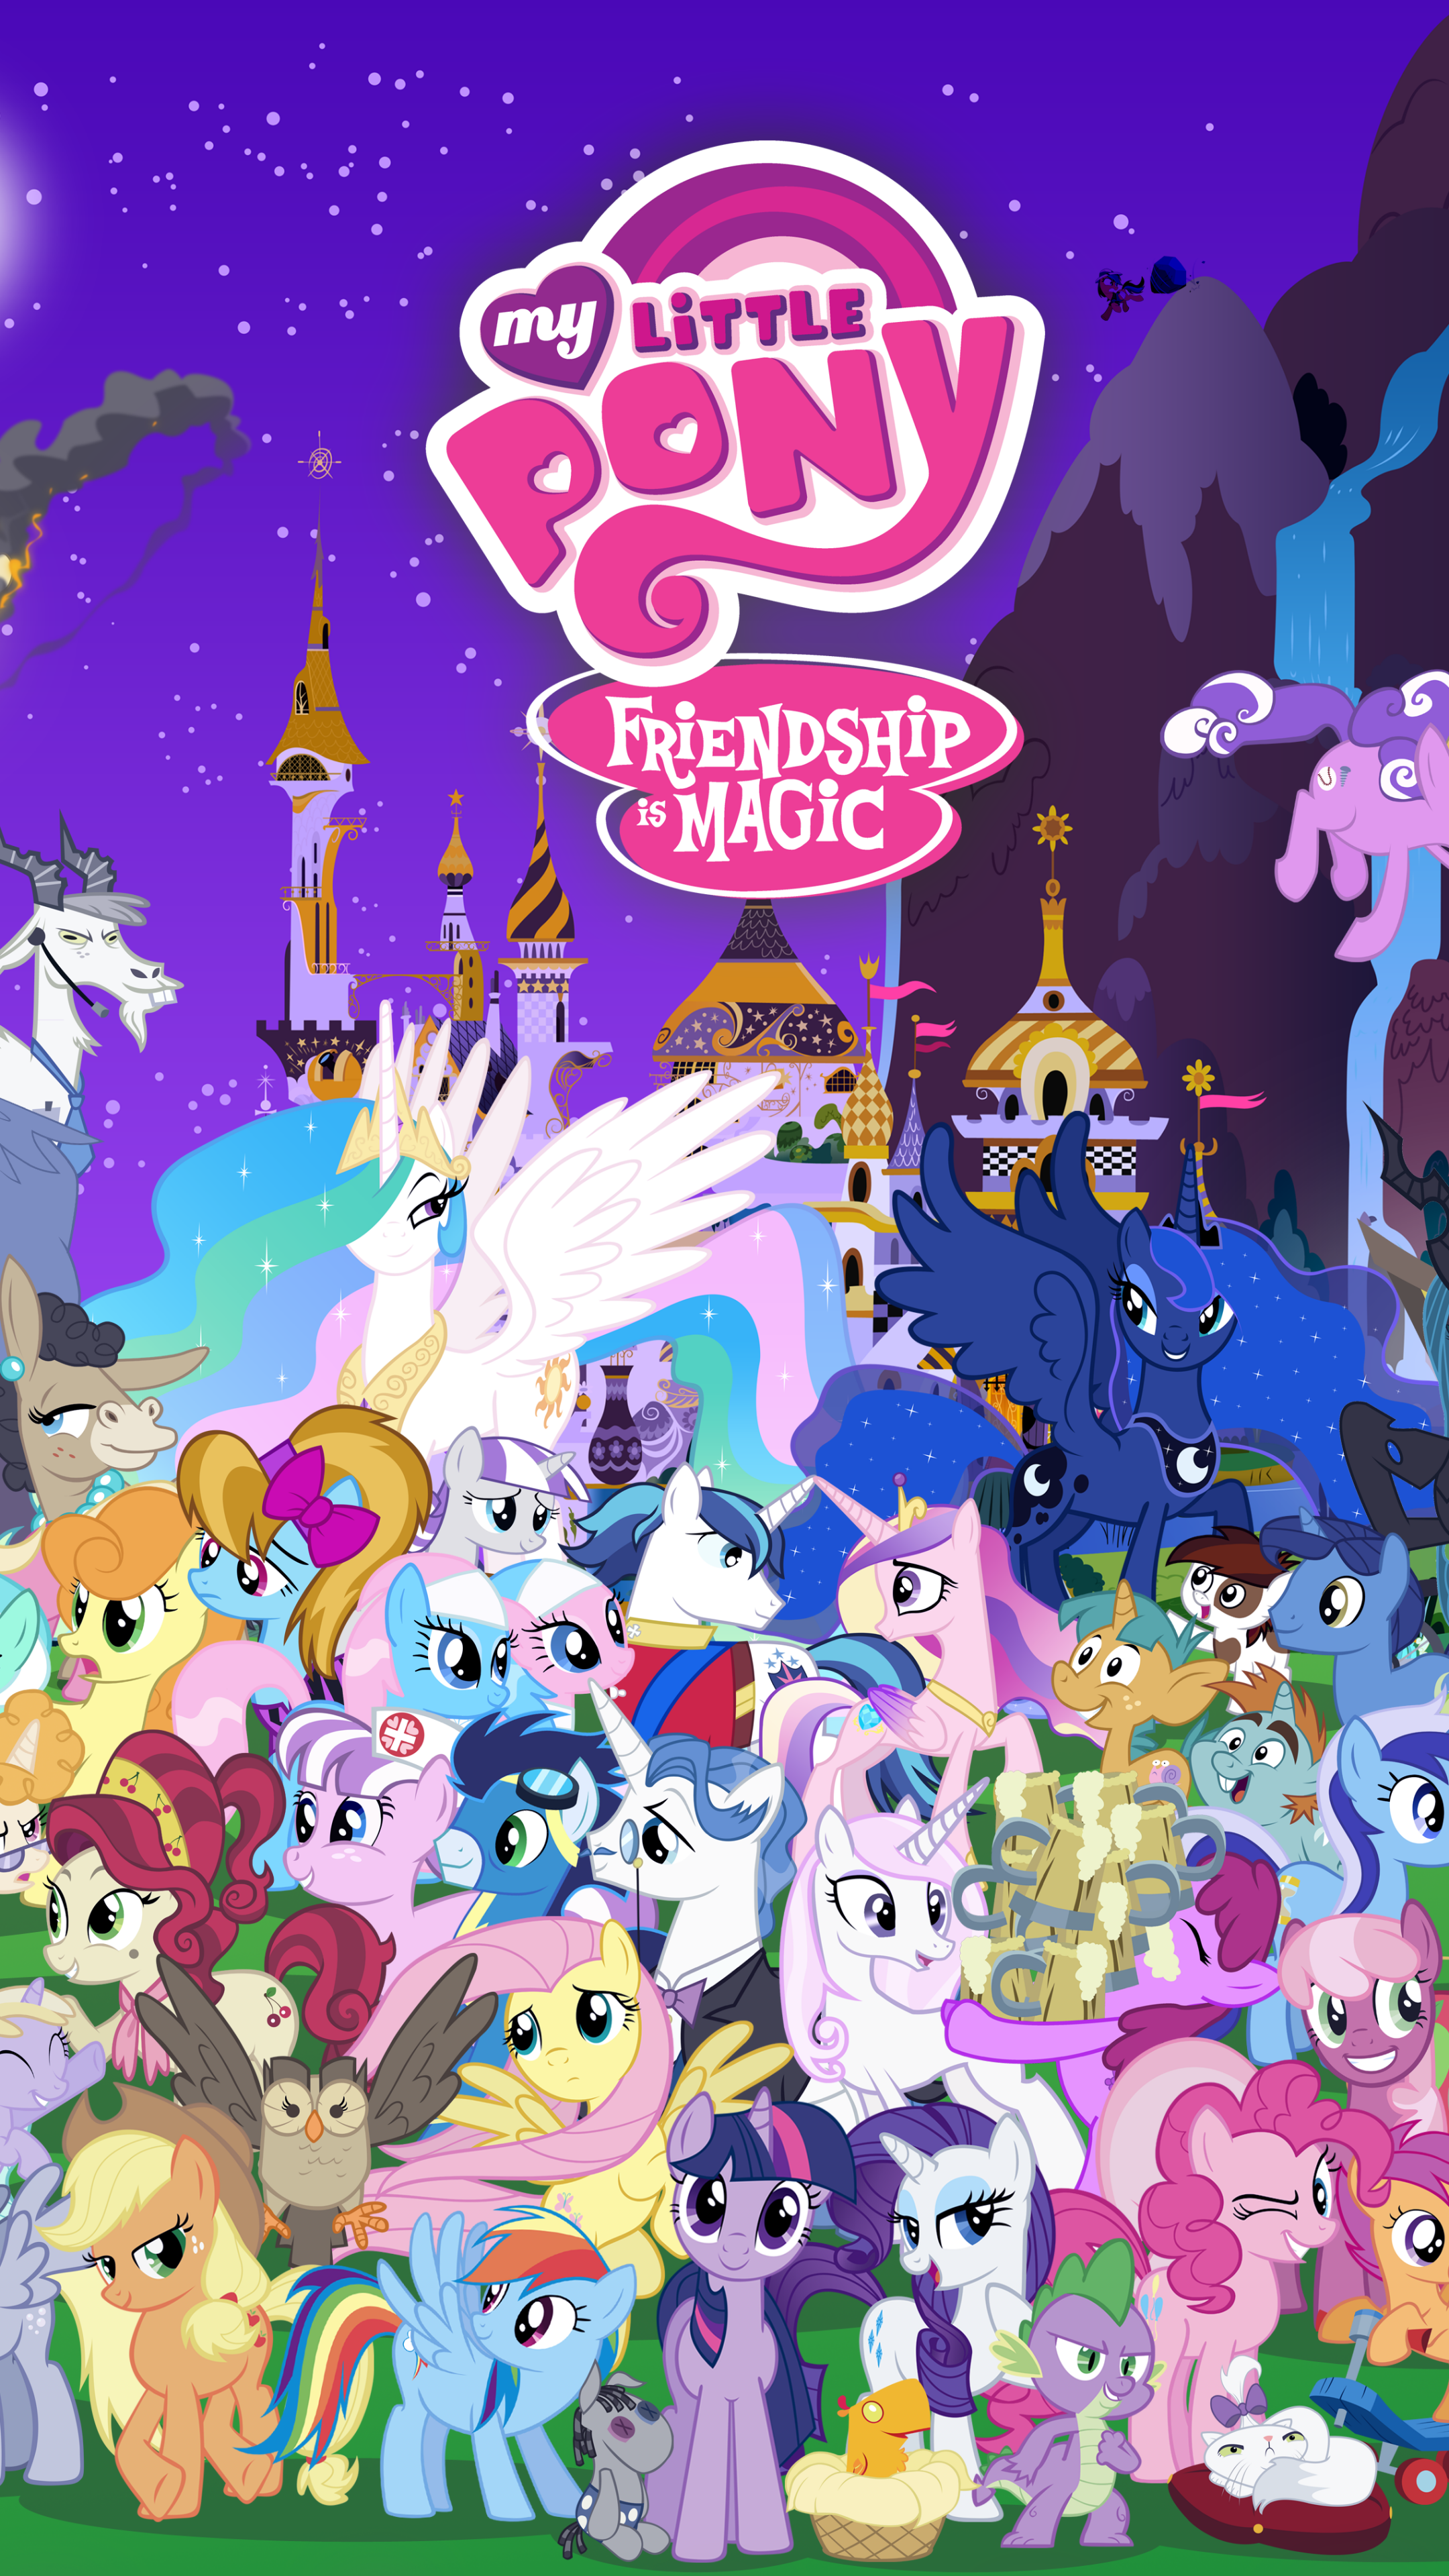 My Little Pony: Friendship is Magic Phone Wallpaper by Blue-Paint-Sea